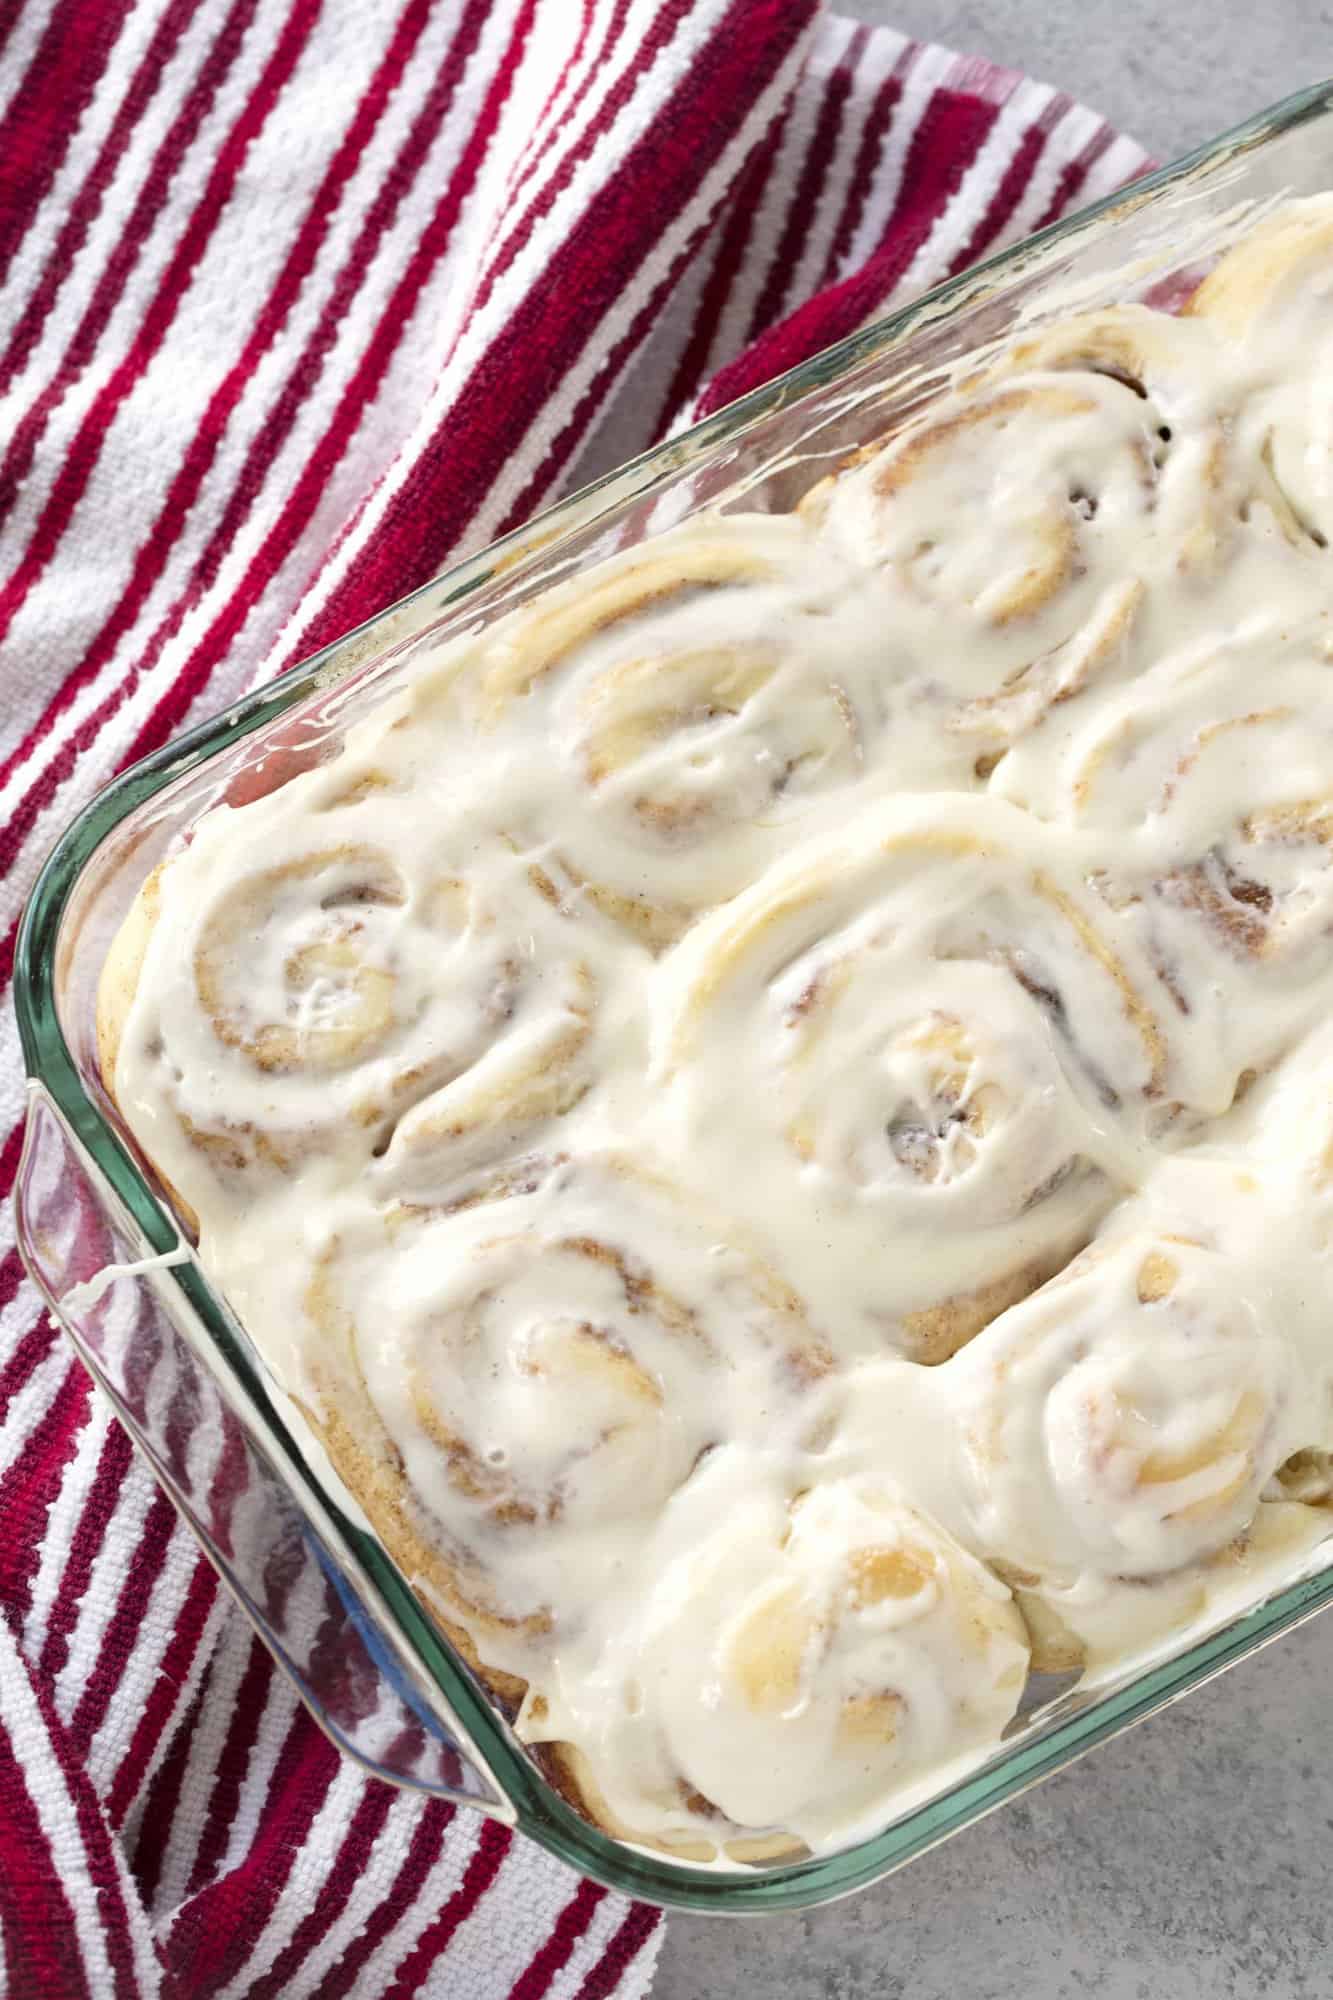 This recipe is hands down the Best Homemade Cinnamon Rolls Ever. The perfect soft, fluffy, gooey cinnamon rolls are right at your fingertips. This is the only recipe you'll ever need.